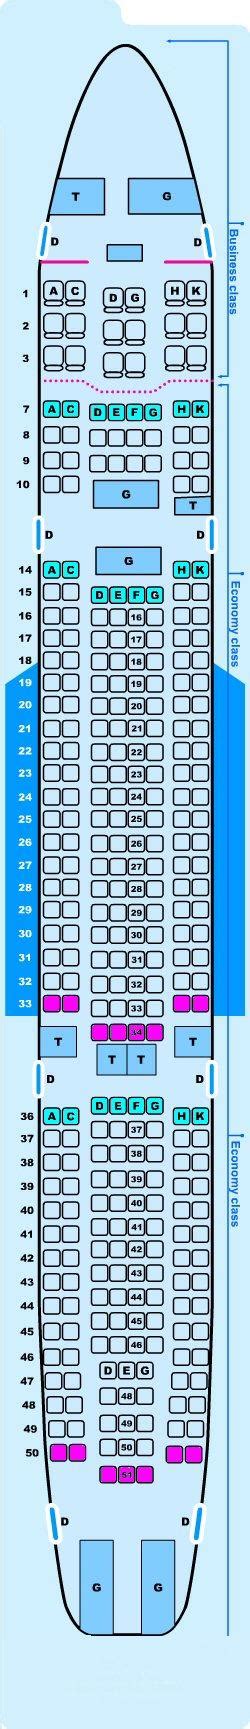 Delta Airbus A Seat Map Updated Find The Best Seat